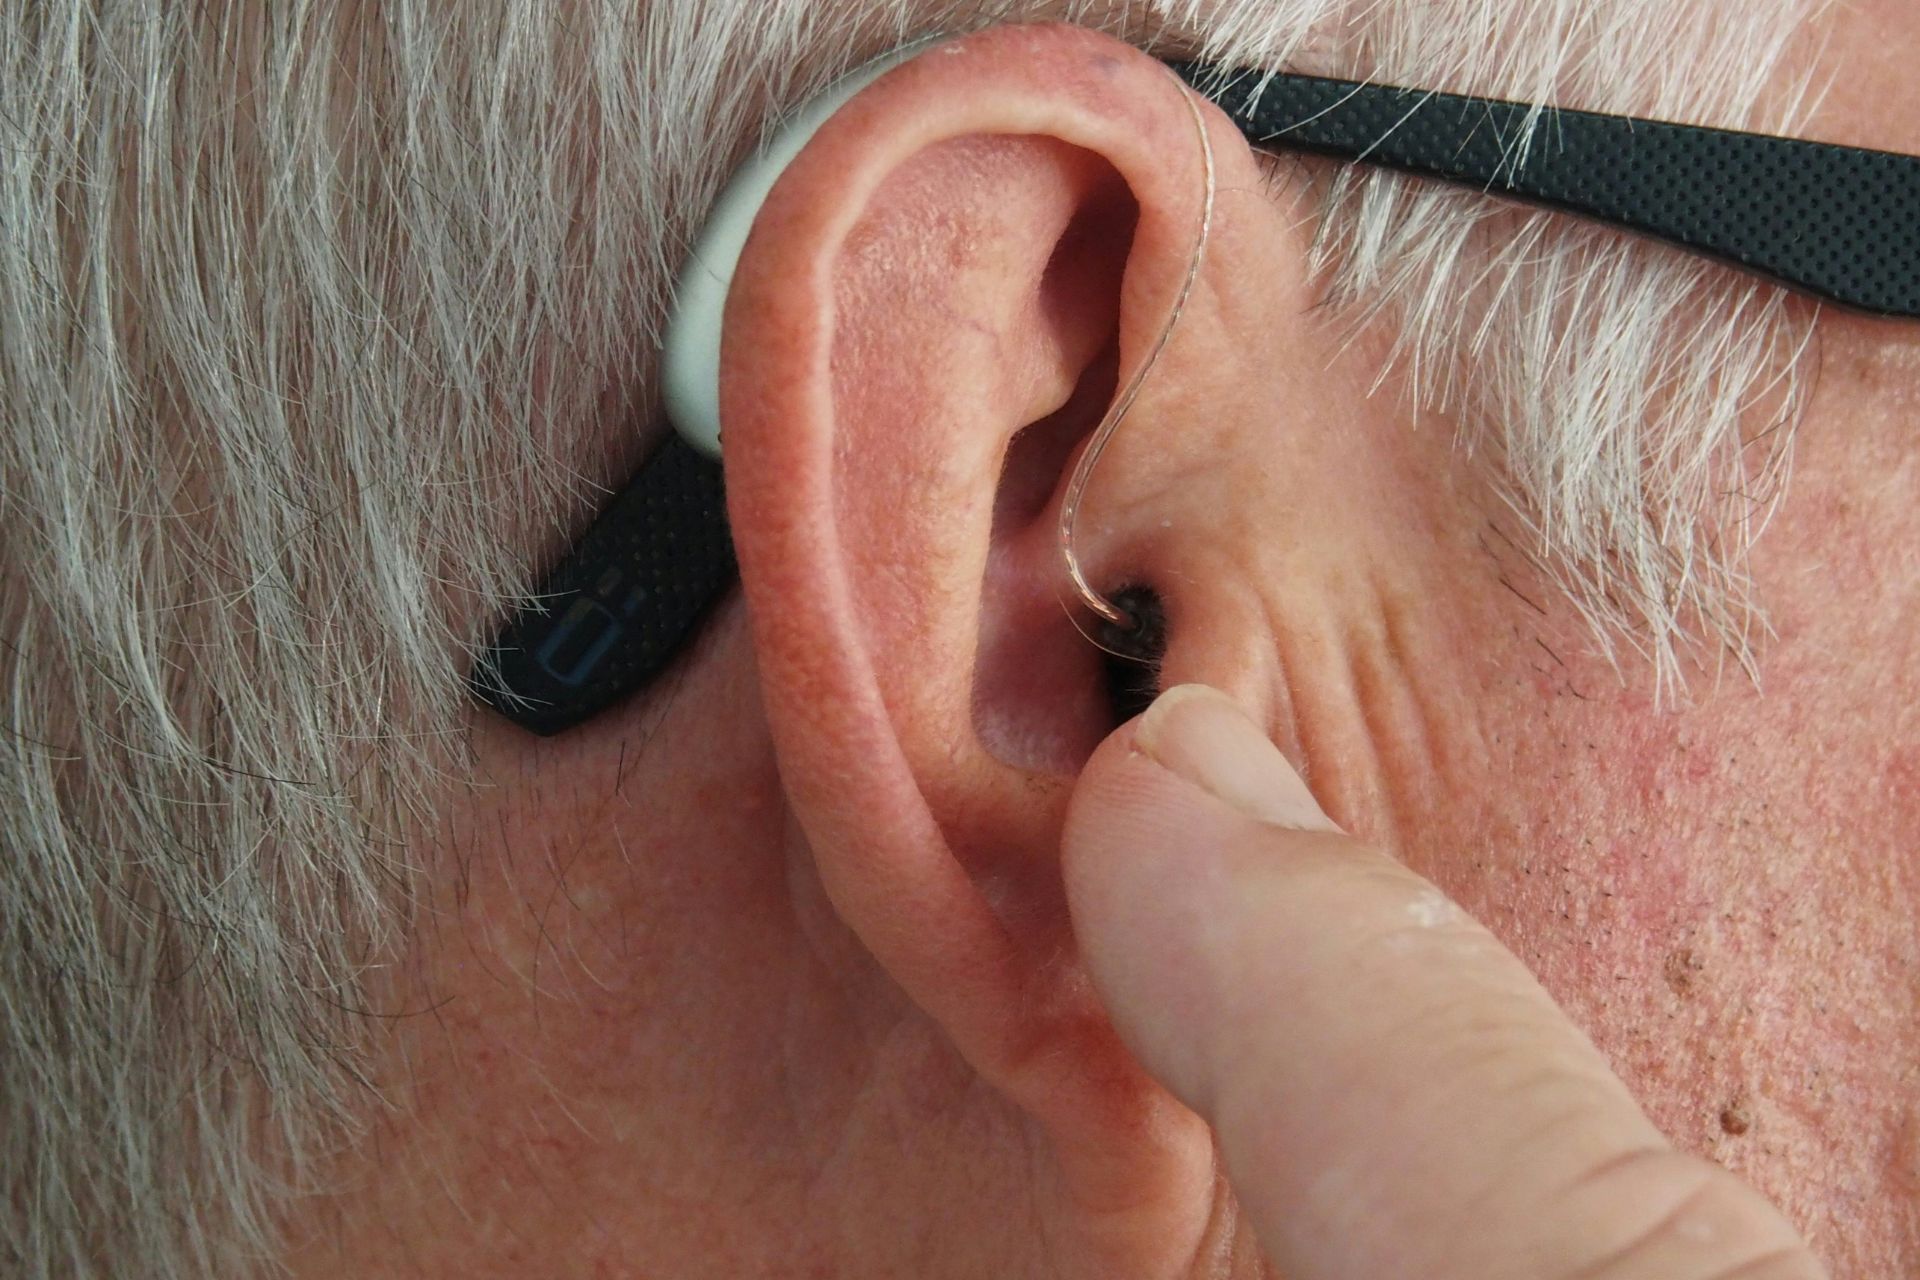 Windows 11 Hearing Aid Support